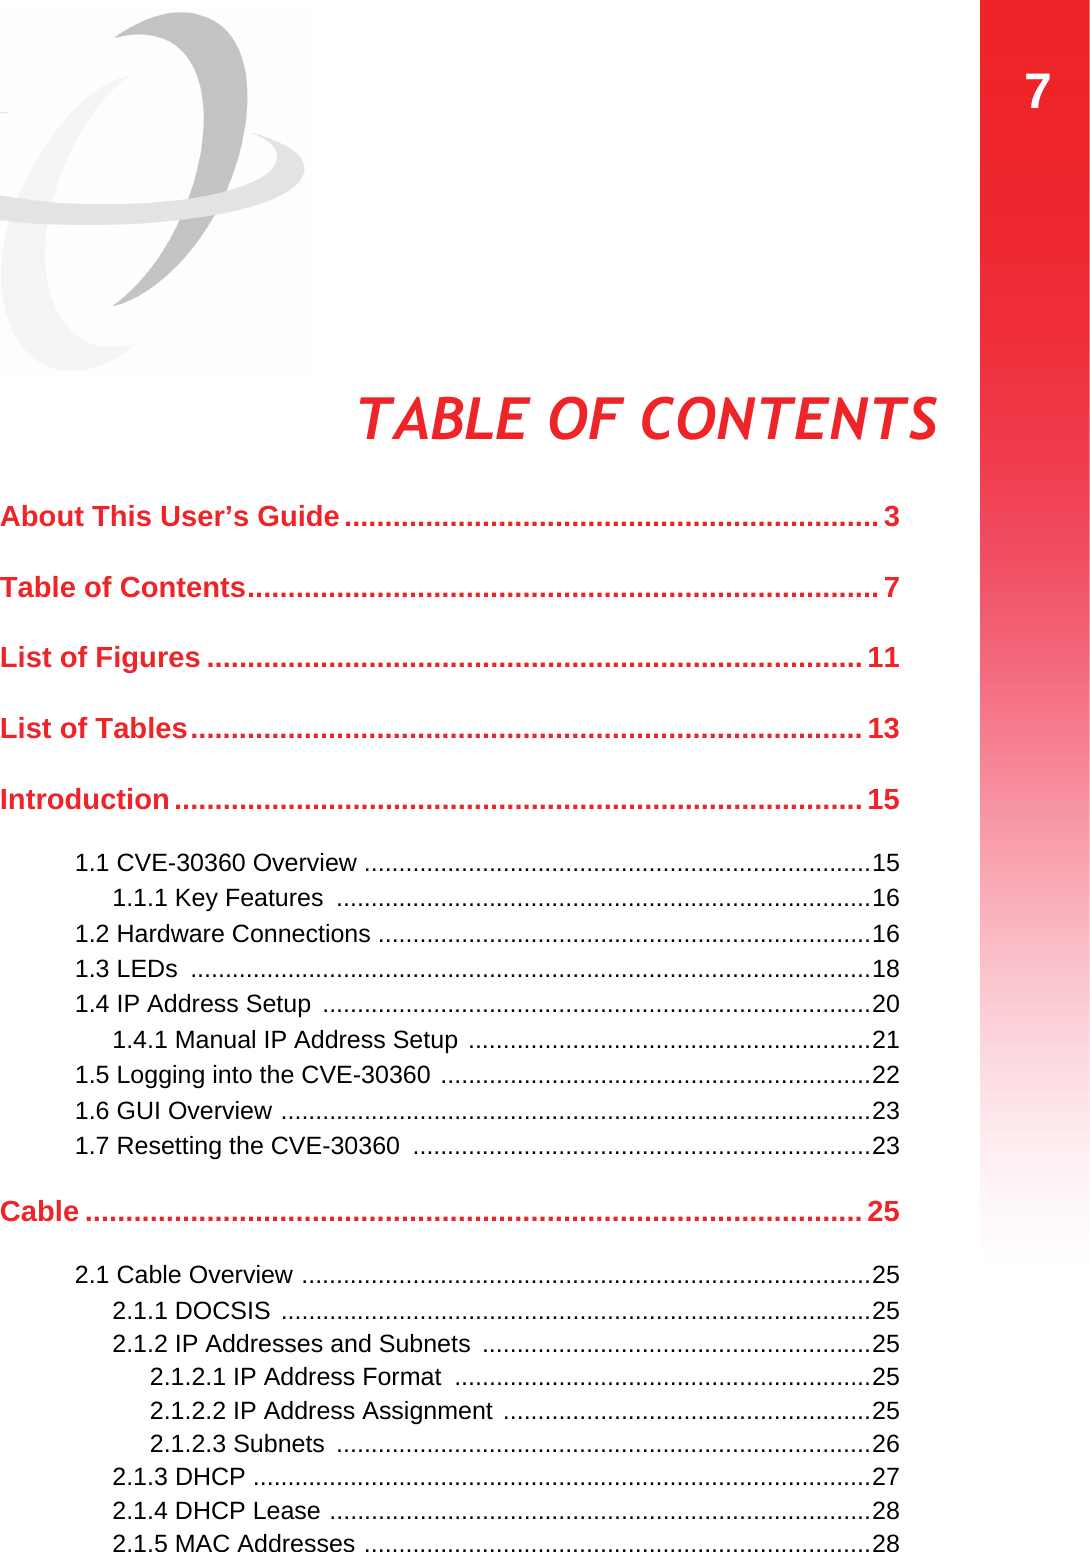 7TABLE OF CONTENTSTABLE OF CONTENTSAbout This User’s Guide..................................................................3Table of Contents..............................................................................7List of Figures .................................................................................11List of Tables...................................................................................13Introduction.....................................................................................151.1 CVE-30360 Overview .........................................................................151.1.1 Key Features  .............................................................................161.2 Hardware Connections .......................................................................161.3 LEDs  ..................................................................................................181.4 IP Address Setup  ...............................................................................201.4.1 Manual IP Address Setup ..........................................................211.5 Logging into the CVE-30360 ..............................................................221.6 GUI Overview .....................................................................................231.7 Resetting the CVE-30360  ..................................................................23Cable ................................................................................................ 252.1 Cable Overview ..................................................................................252.1.1 DOCSIS .....................................................................................252.1.2 IP Addresses and Subnets ........................................................252.1.2.1 IP Address Format  ............................................................252.1.2.2 IP Address Assignment .....................................................252.1.2.3 Subnets  .............................................................................262.1.3 DHCP .........................................................................................272.1.4 DHCP Lease ..............................................................................282.1.5 MAC Addresses .........................................................................28